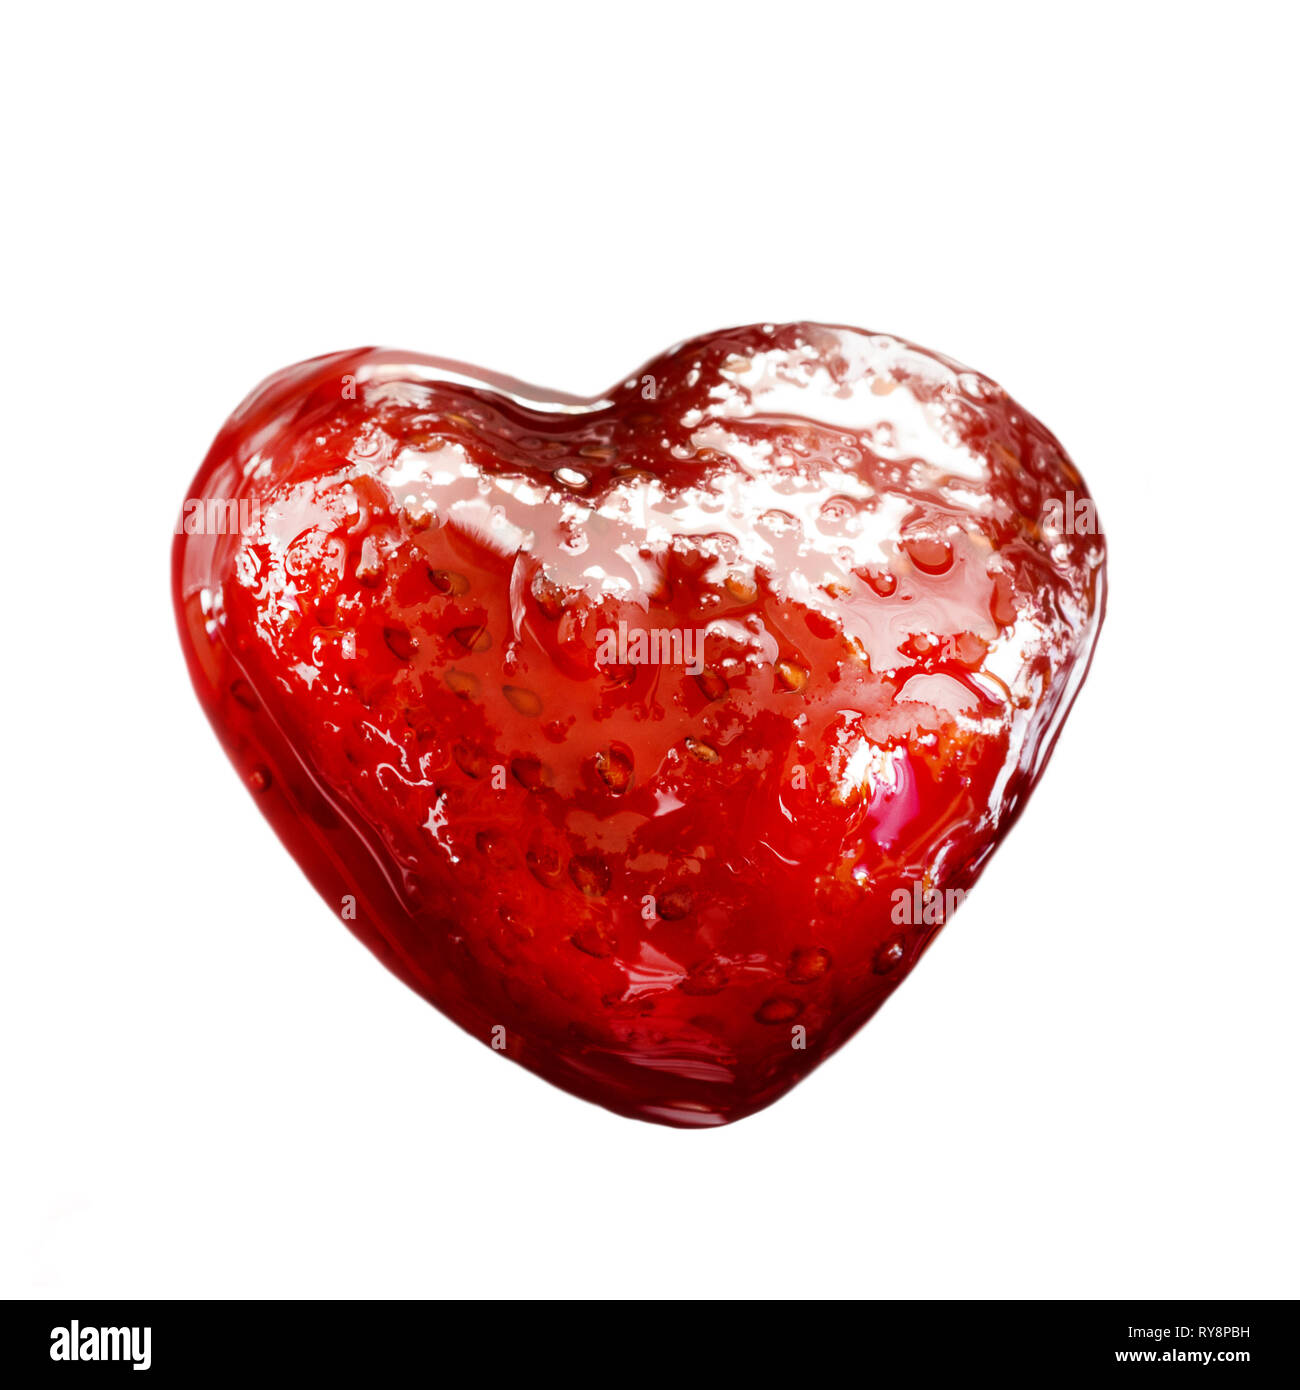 Strawberry jam in a heart shape isolated Stock Photo